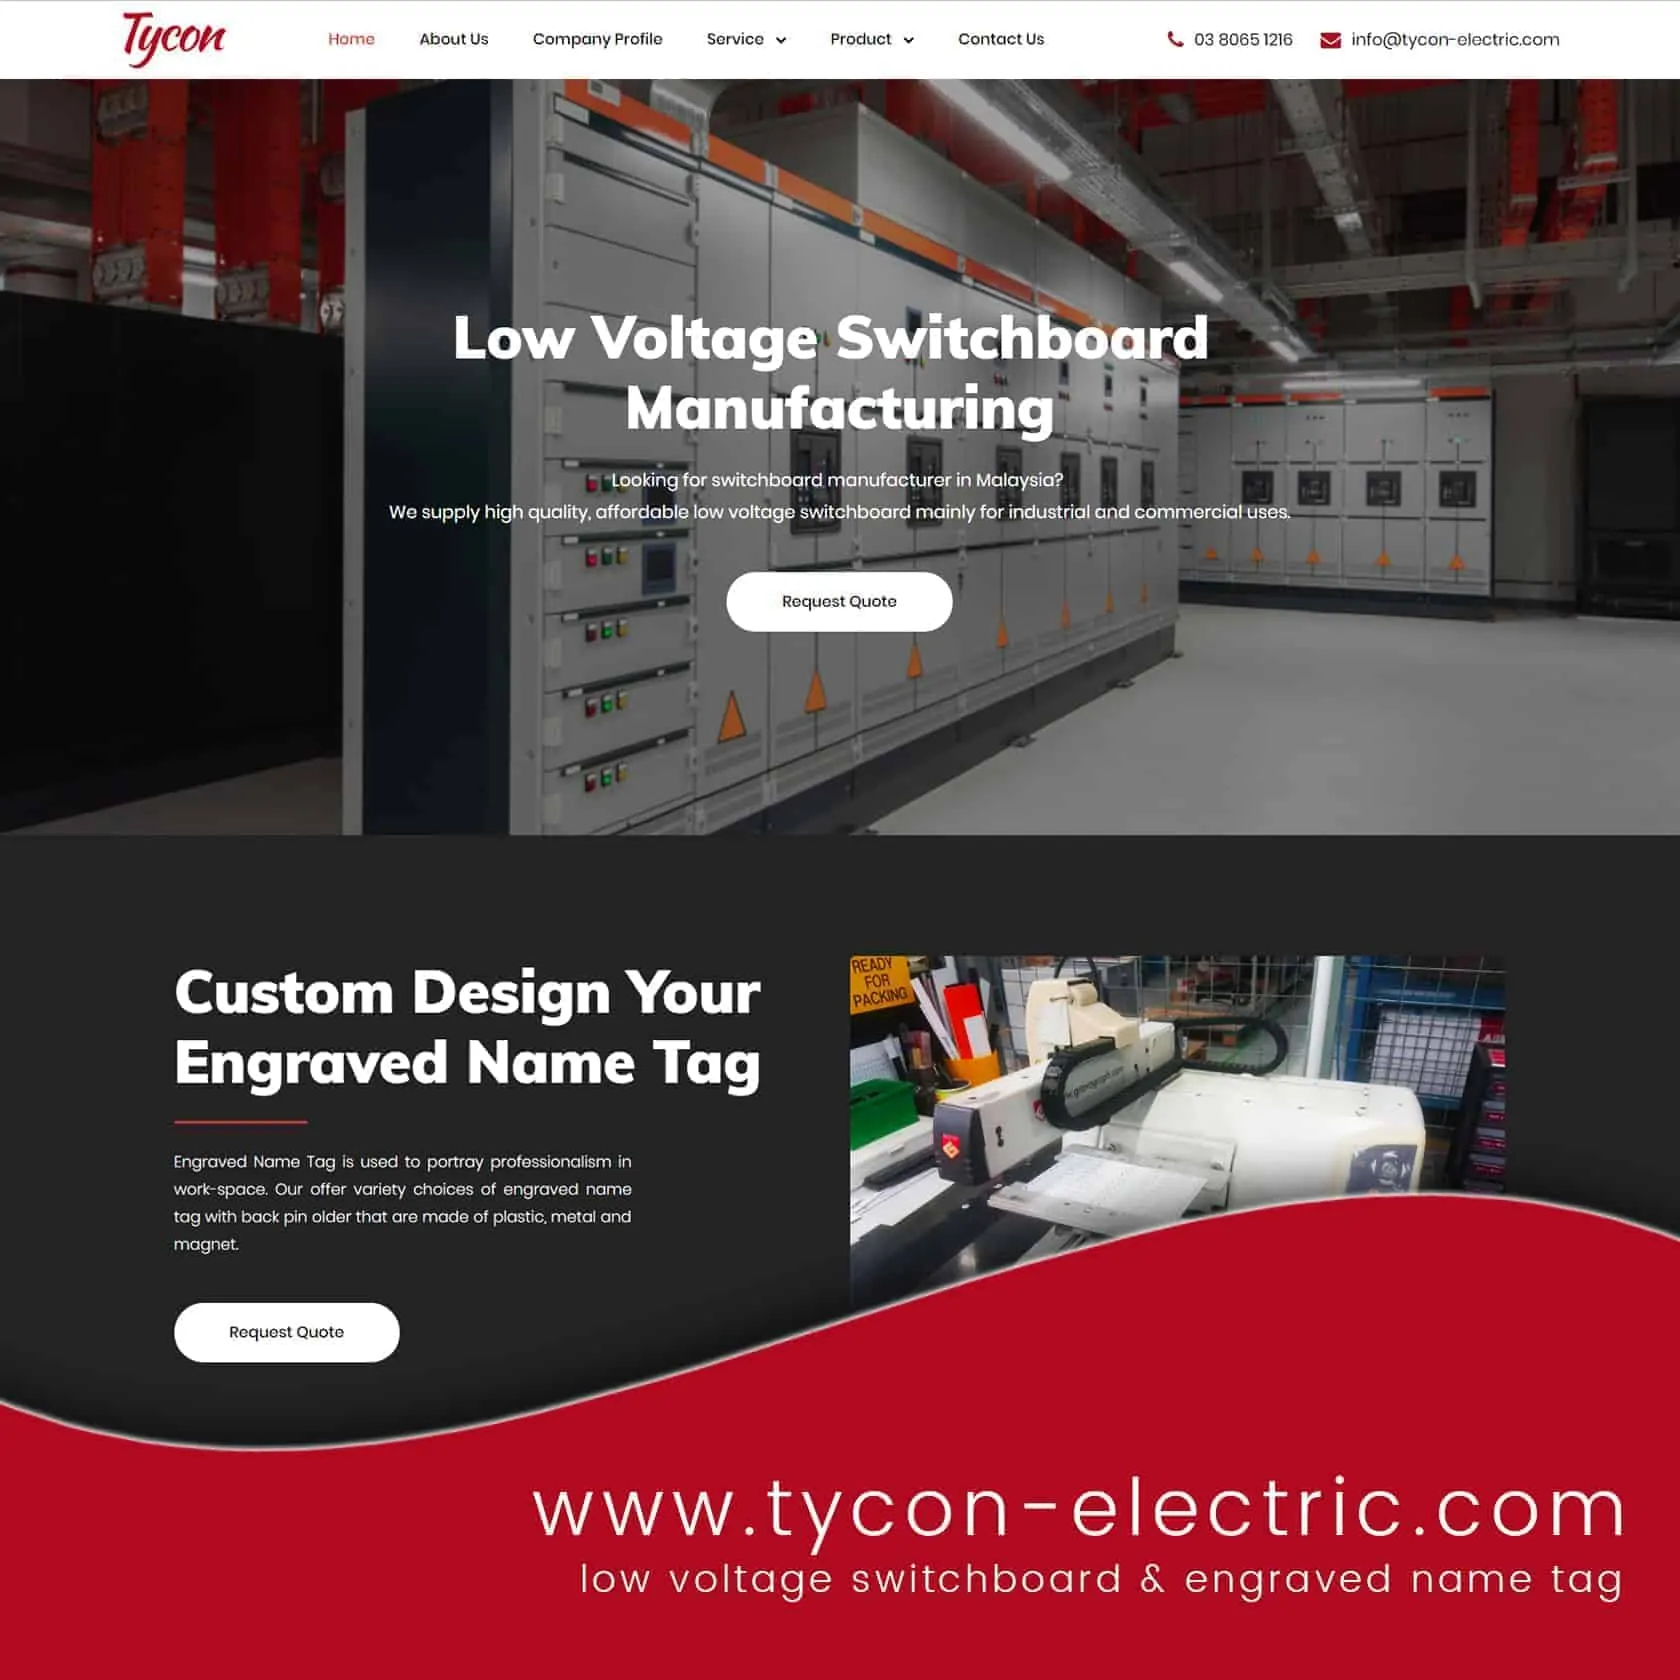 tycon electric